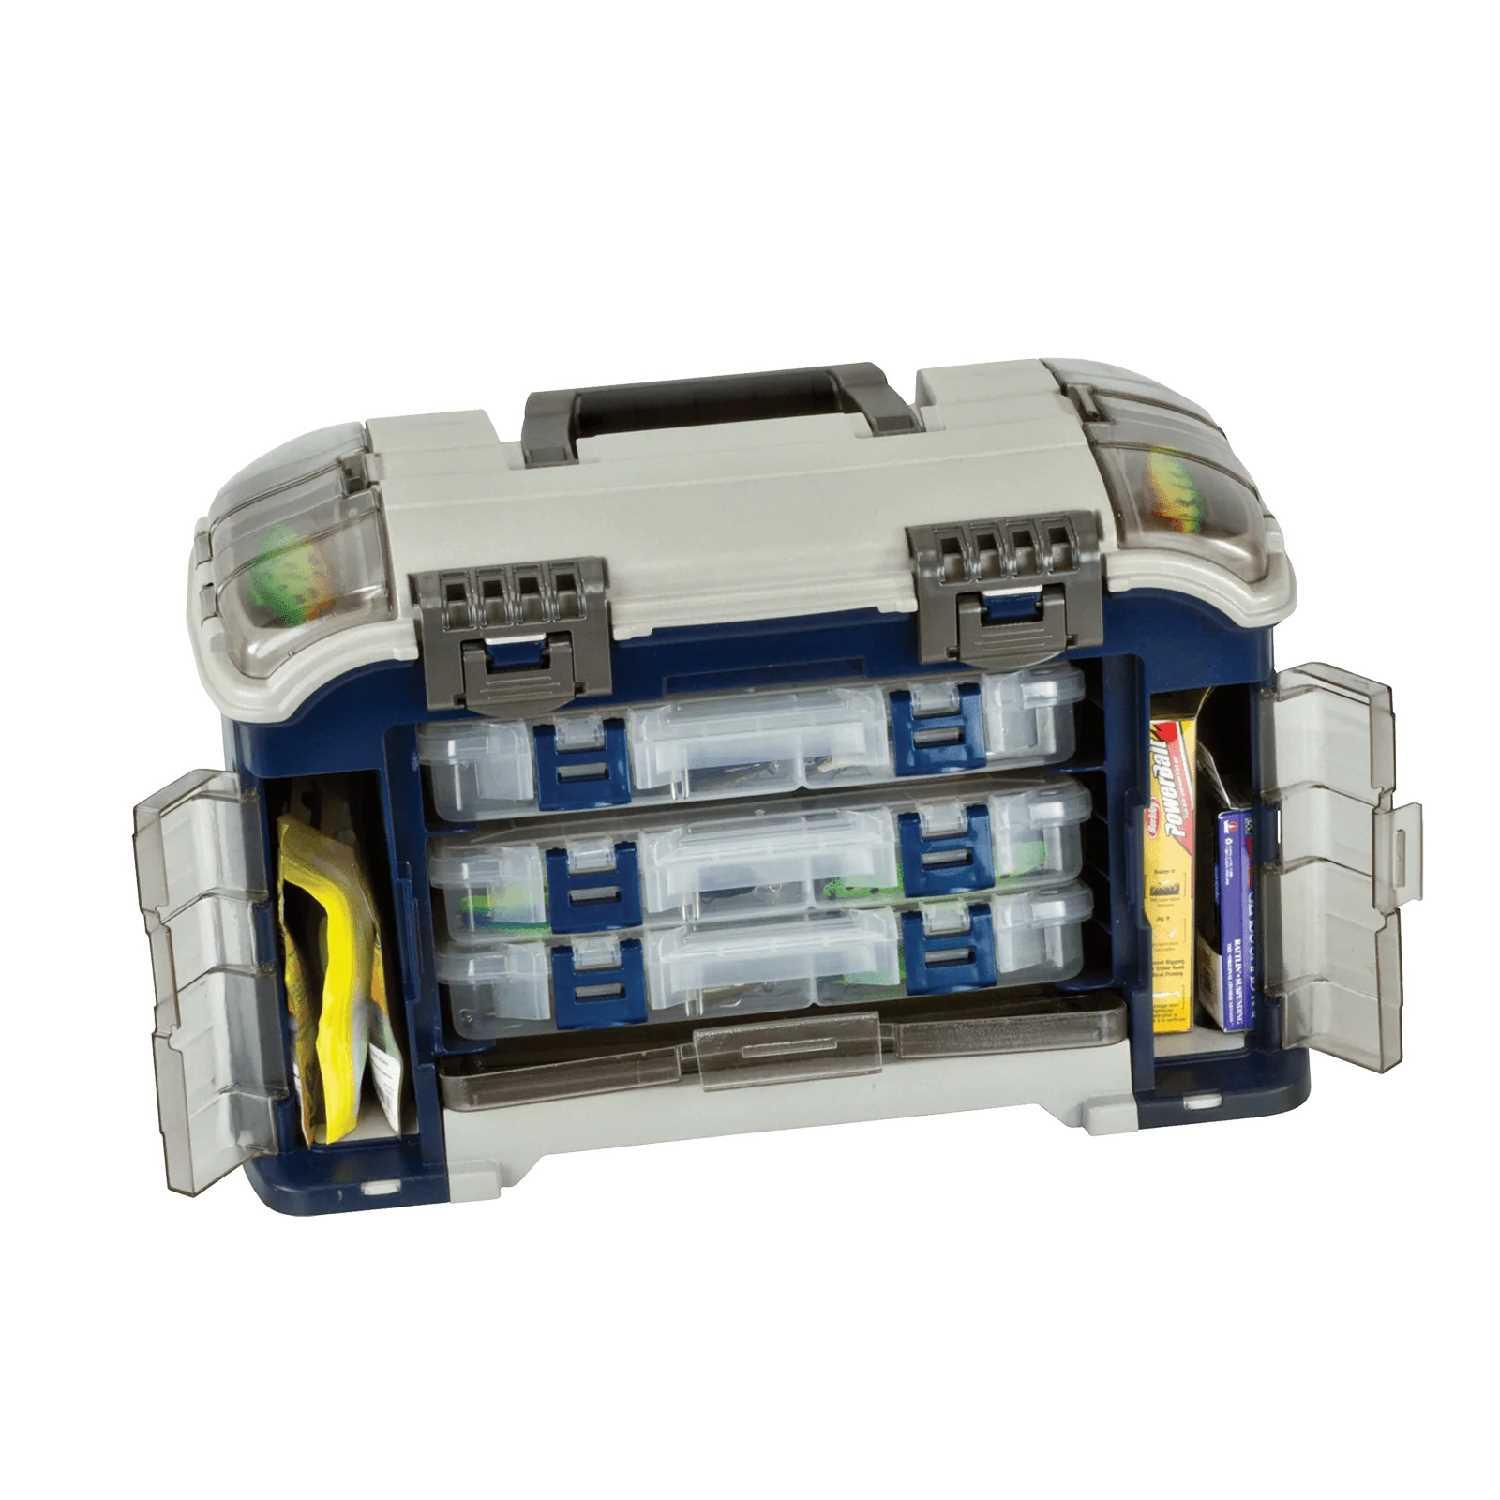 Plano 728001 Angled System Tackle Box - Blue/Silver